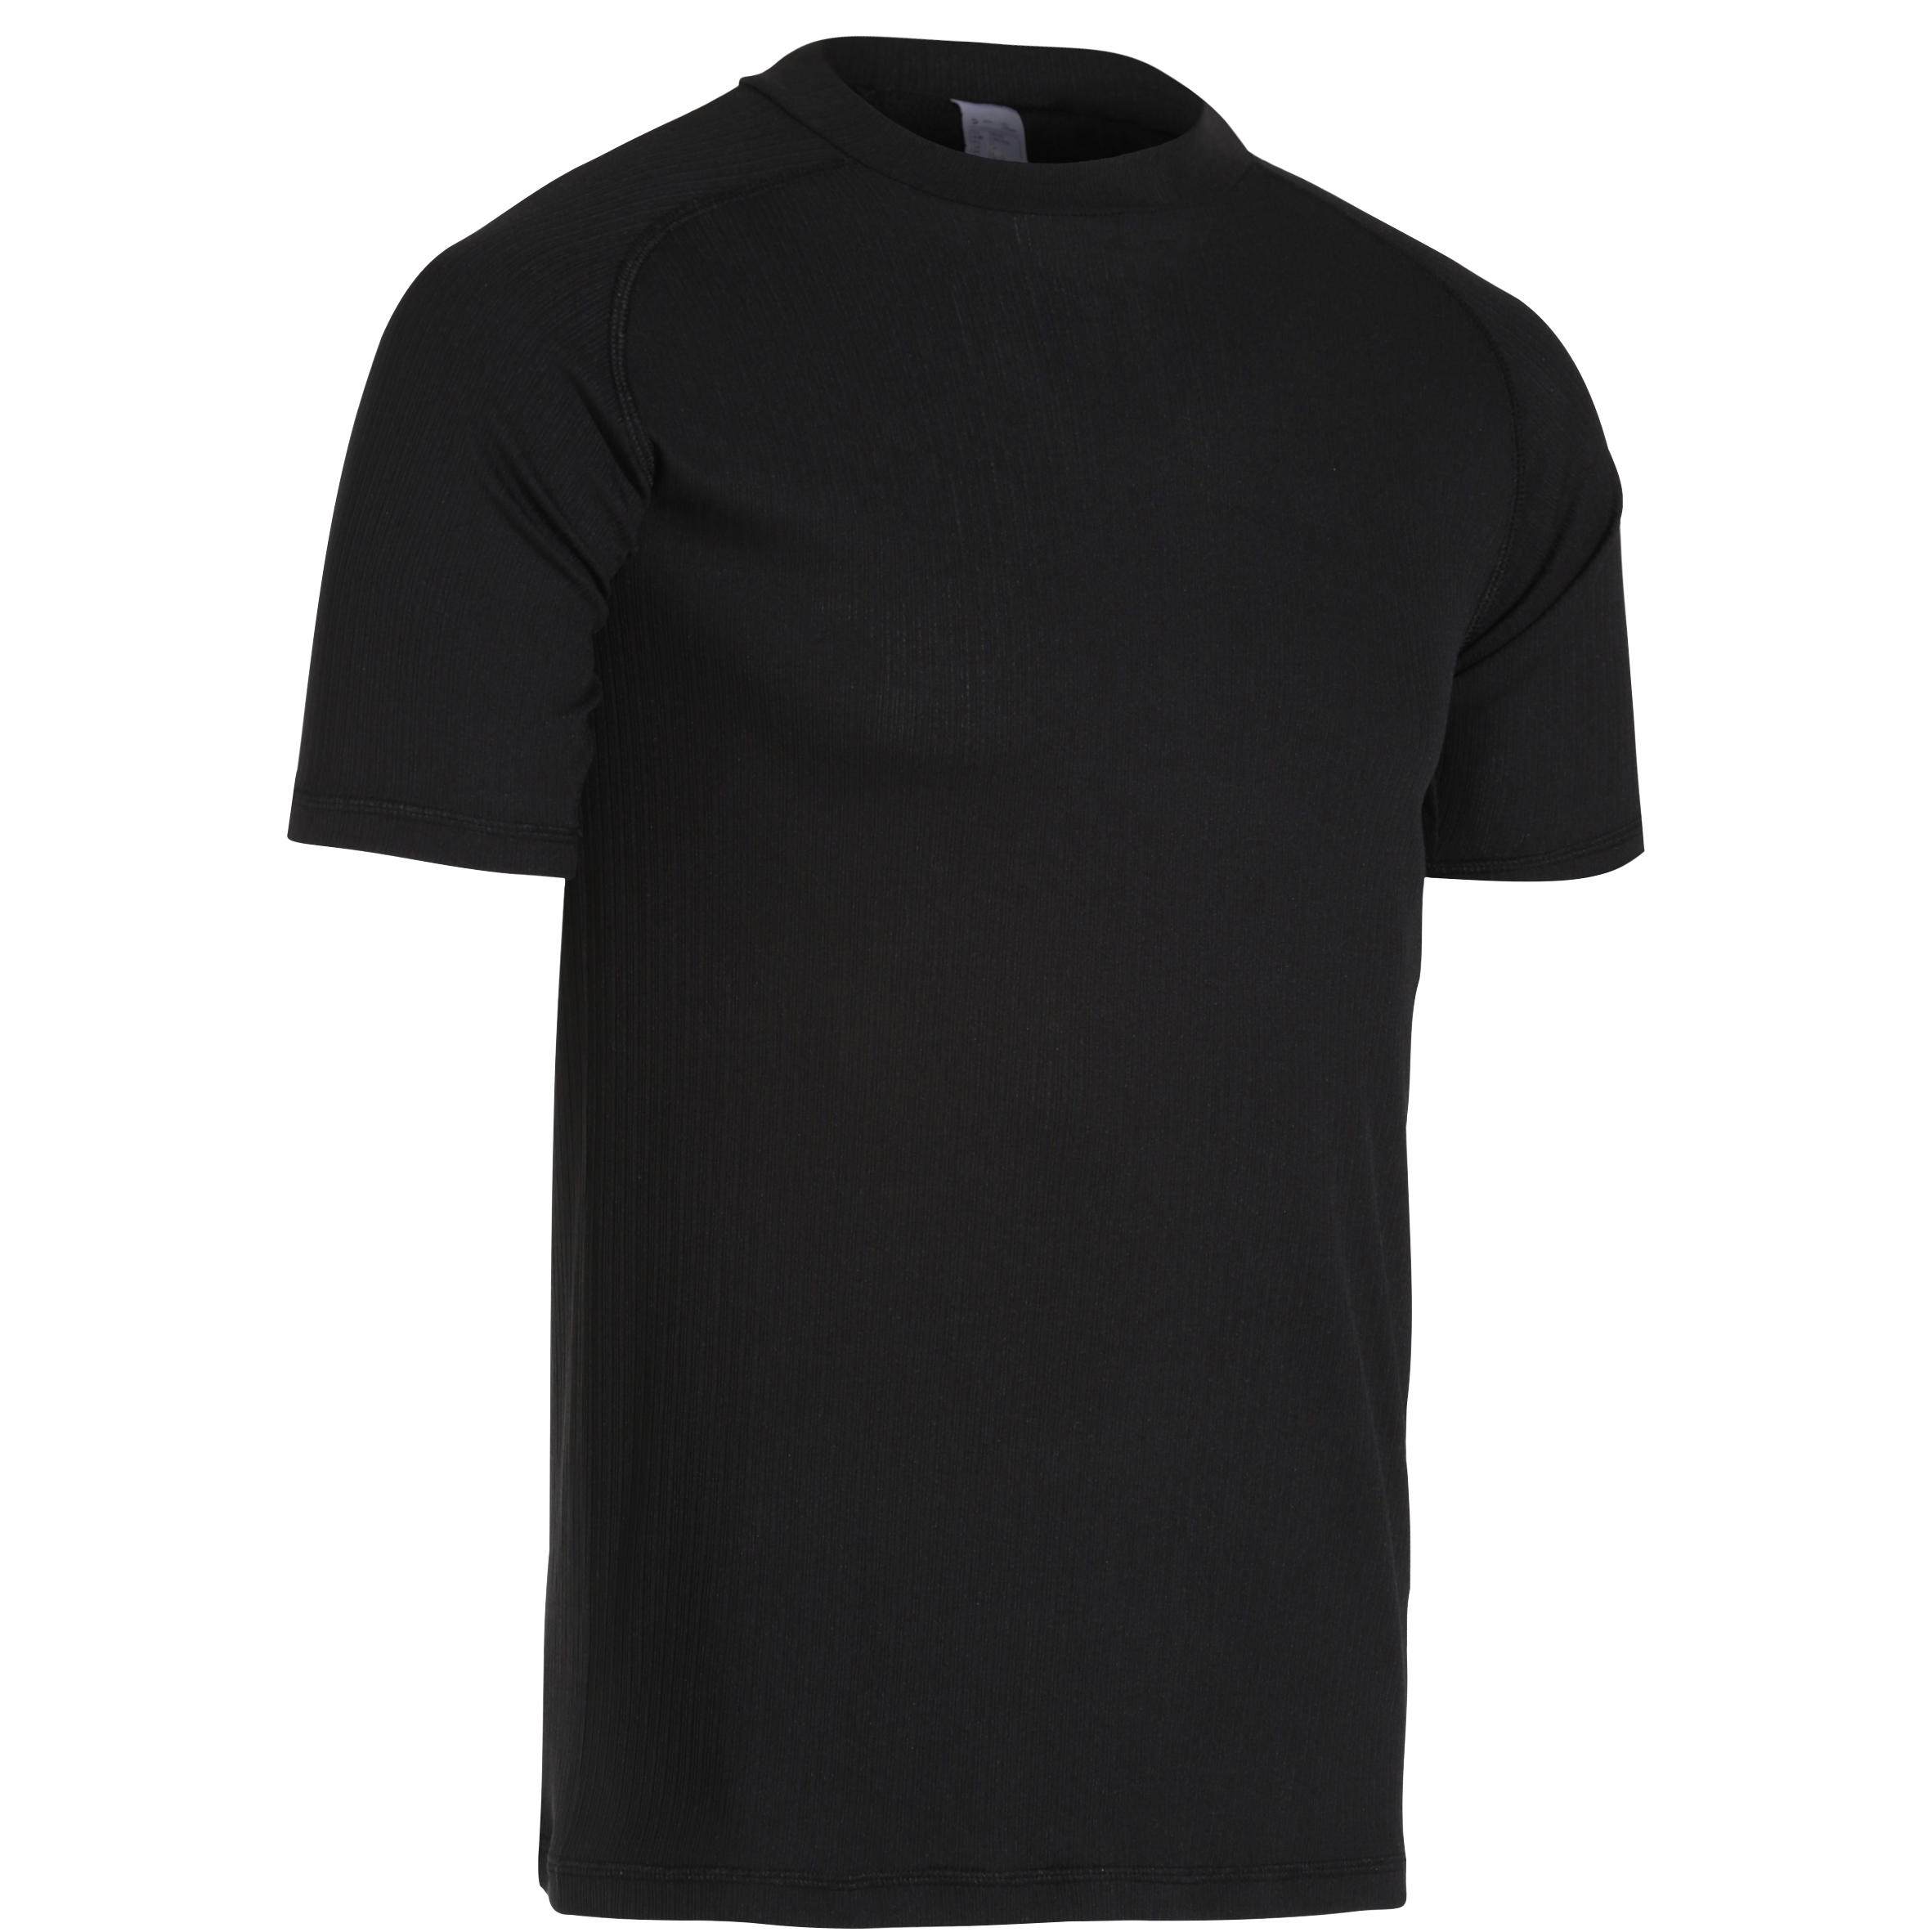 Cycling Baselayer: Innerwear 100 | Now 